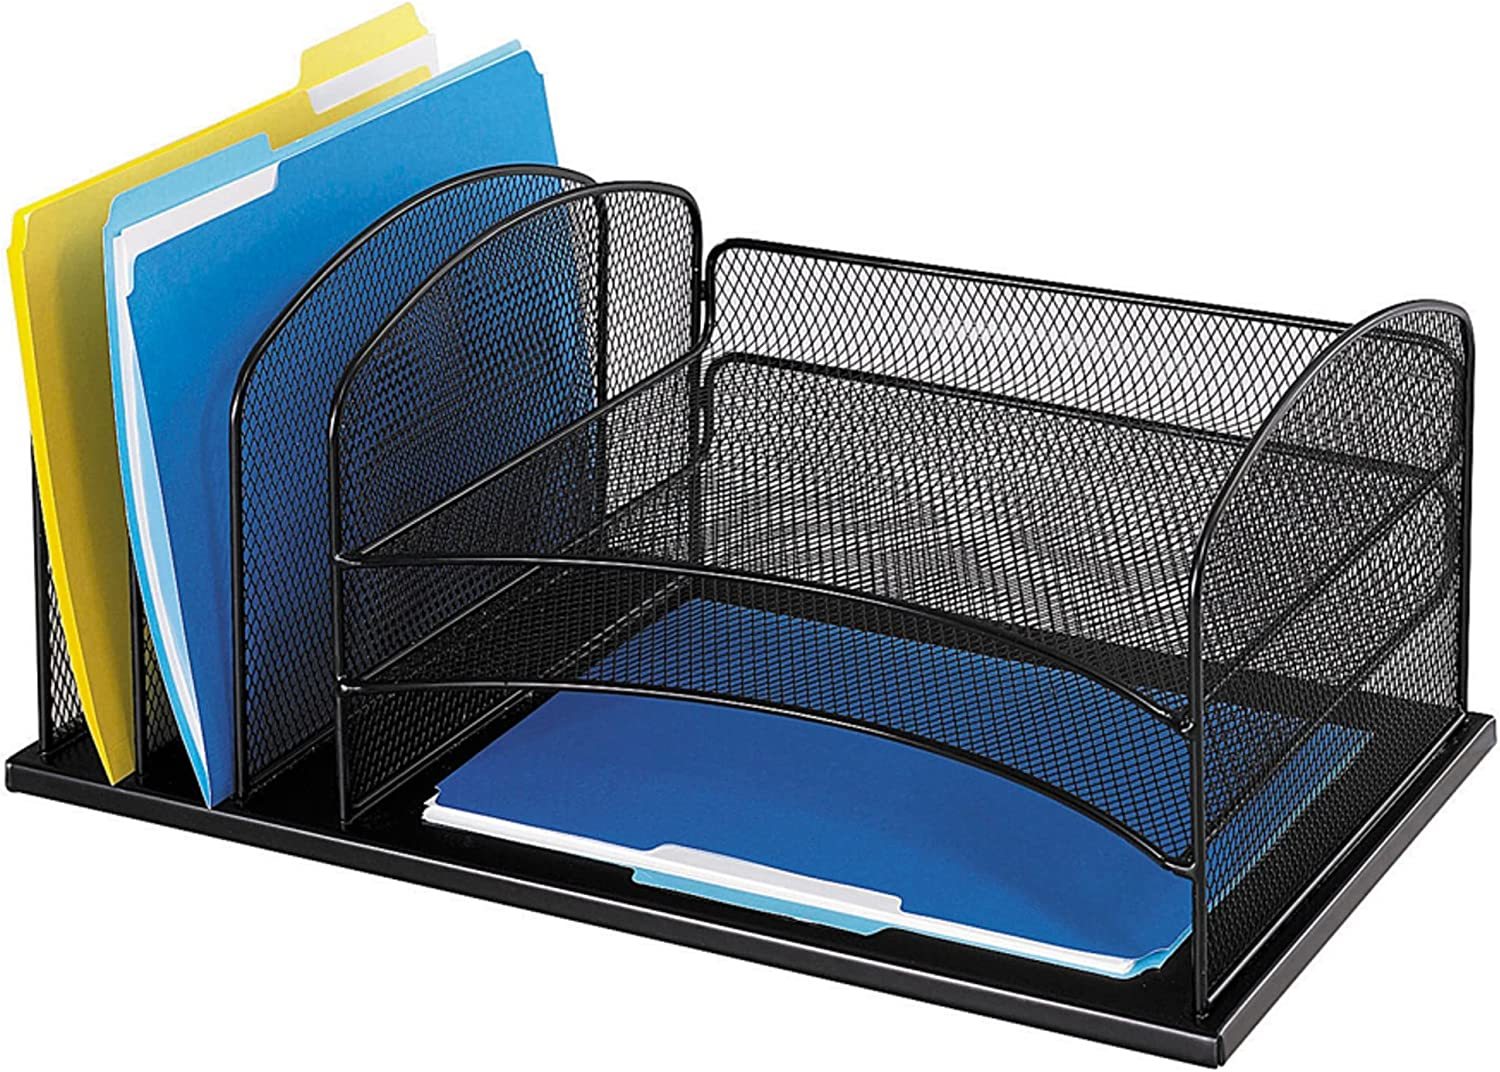 With A Durable Steel Mesh Construction And A Black Powder Coat Finish, Safco - $63.95